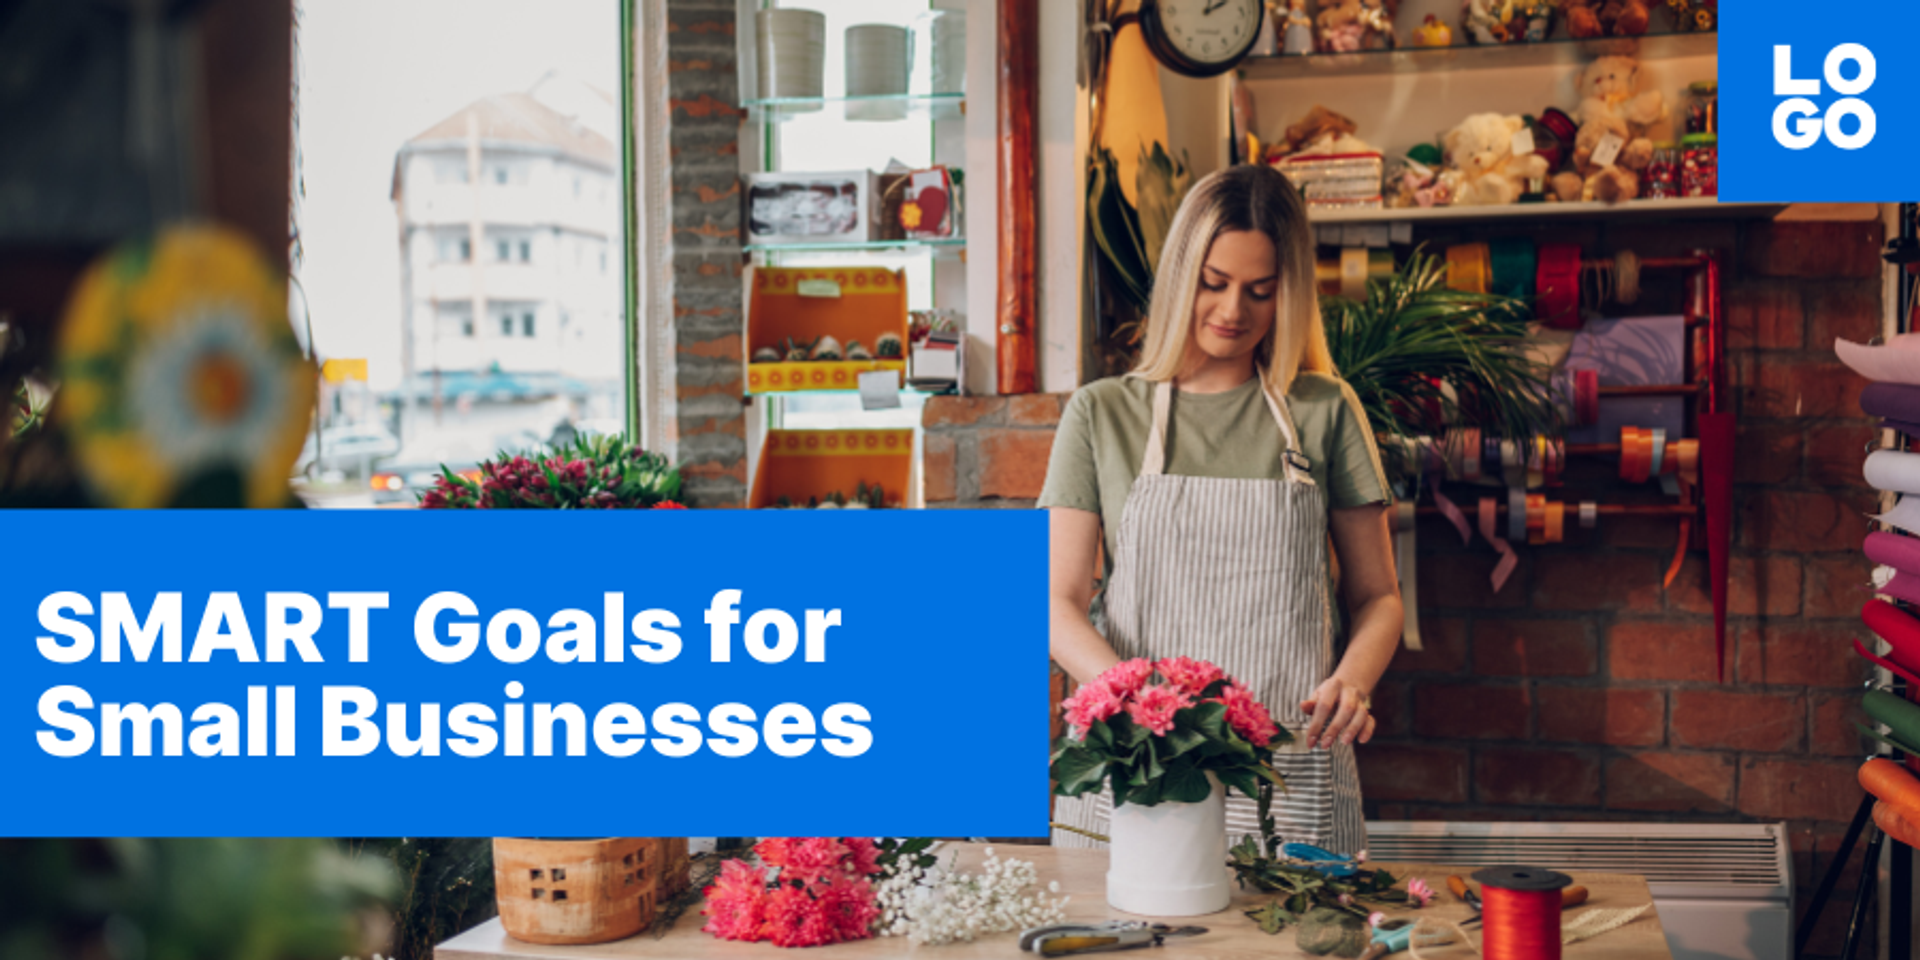  SMART Goals Examples for Small Businesses